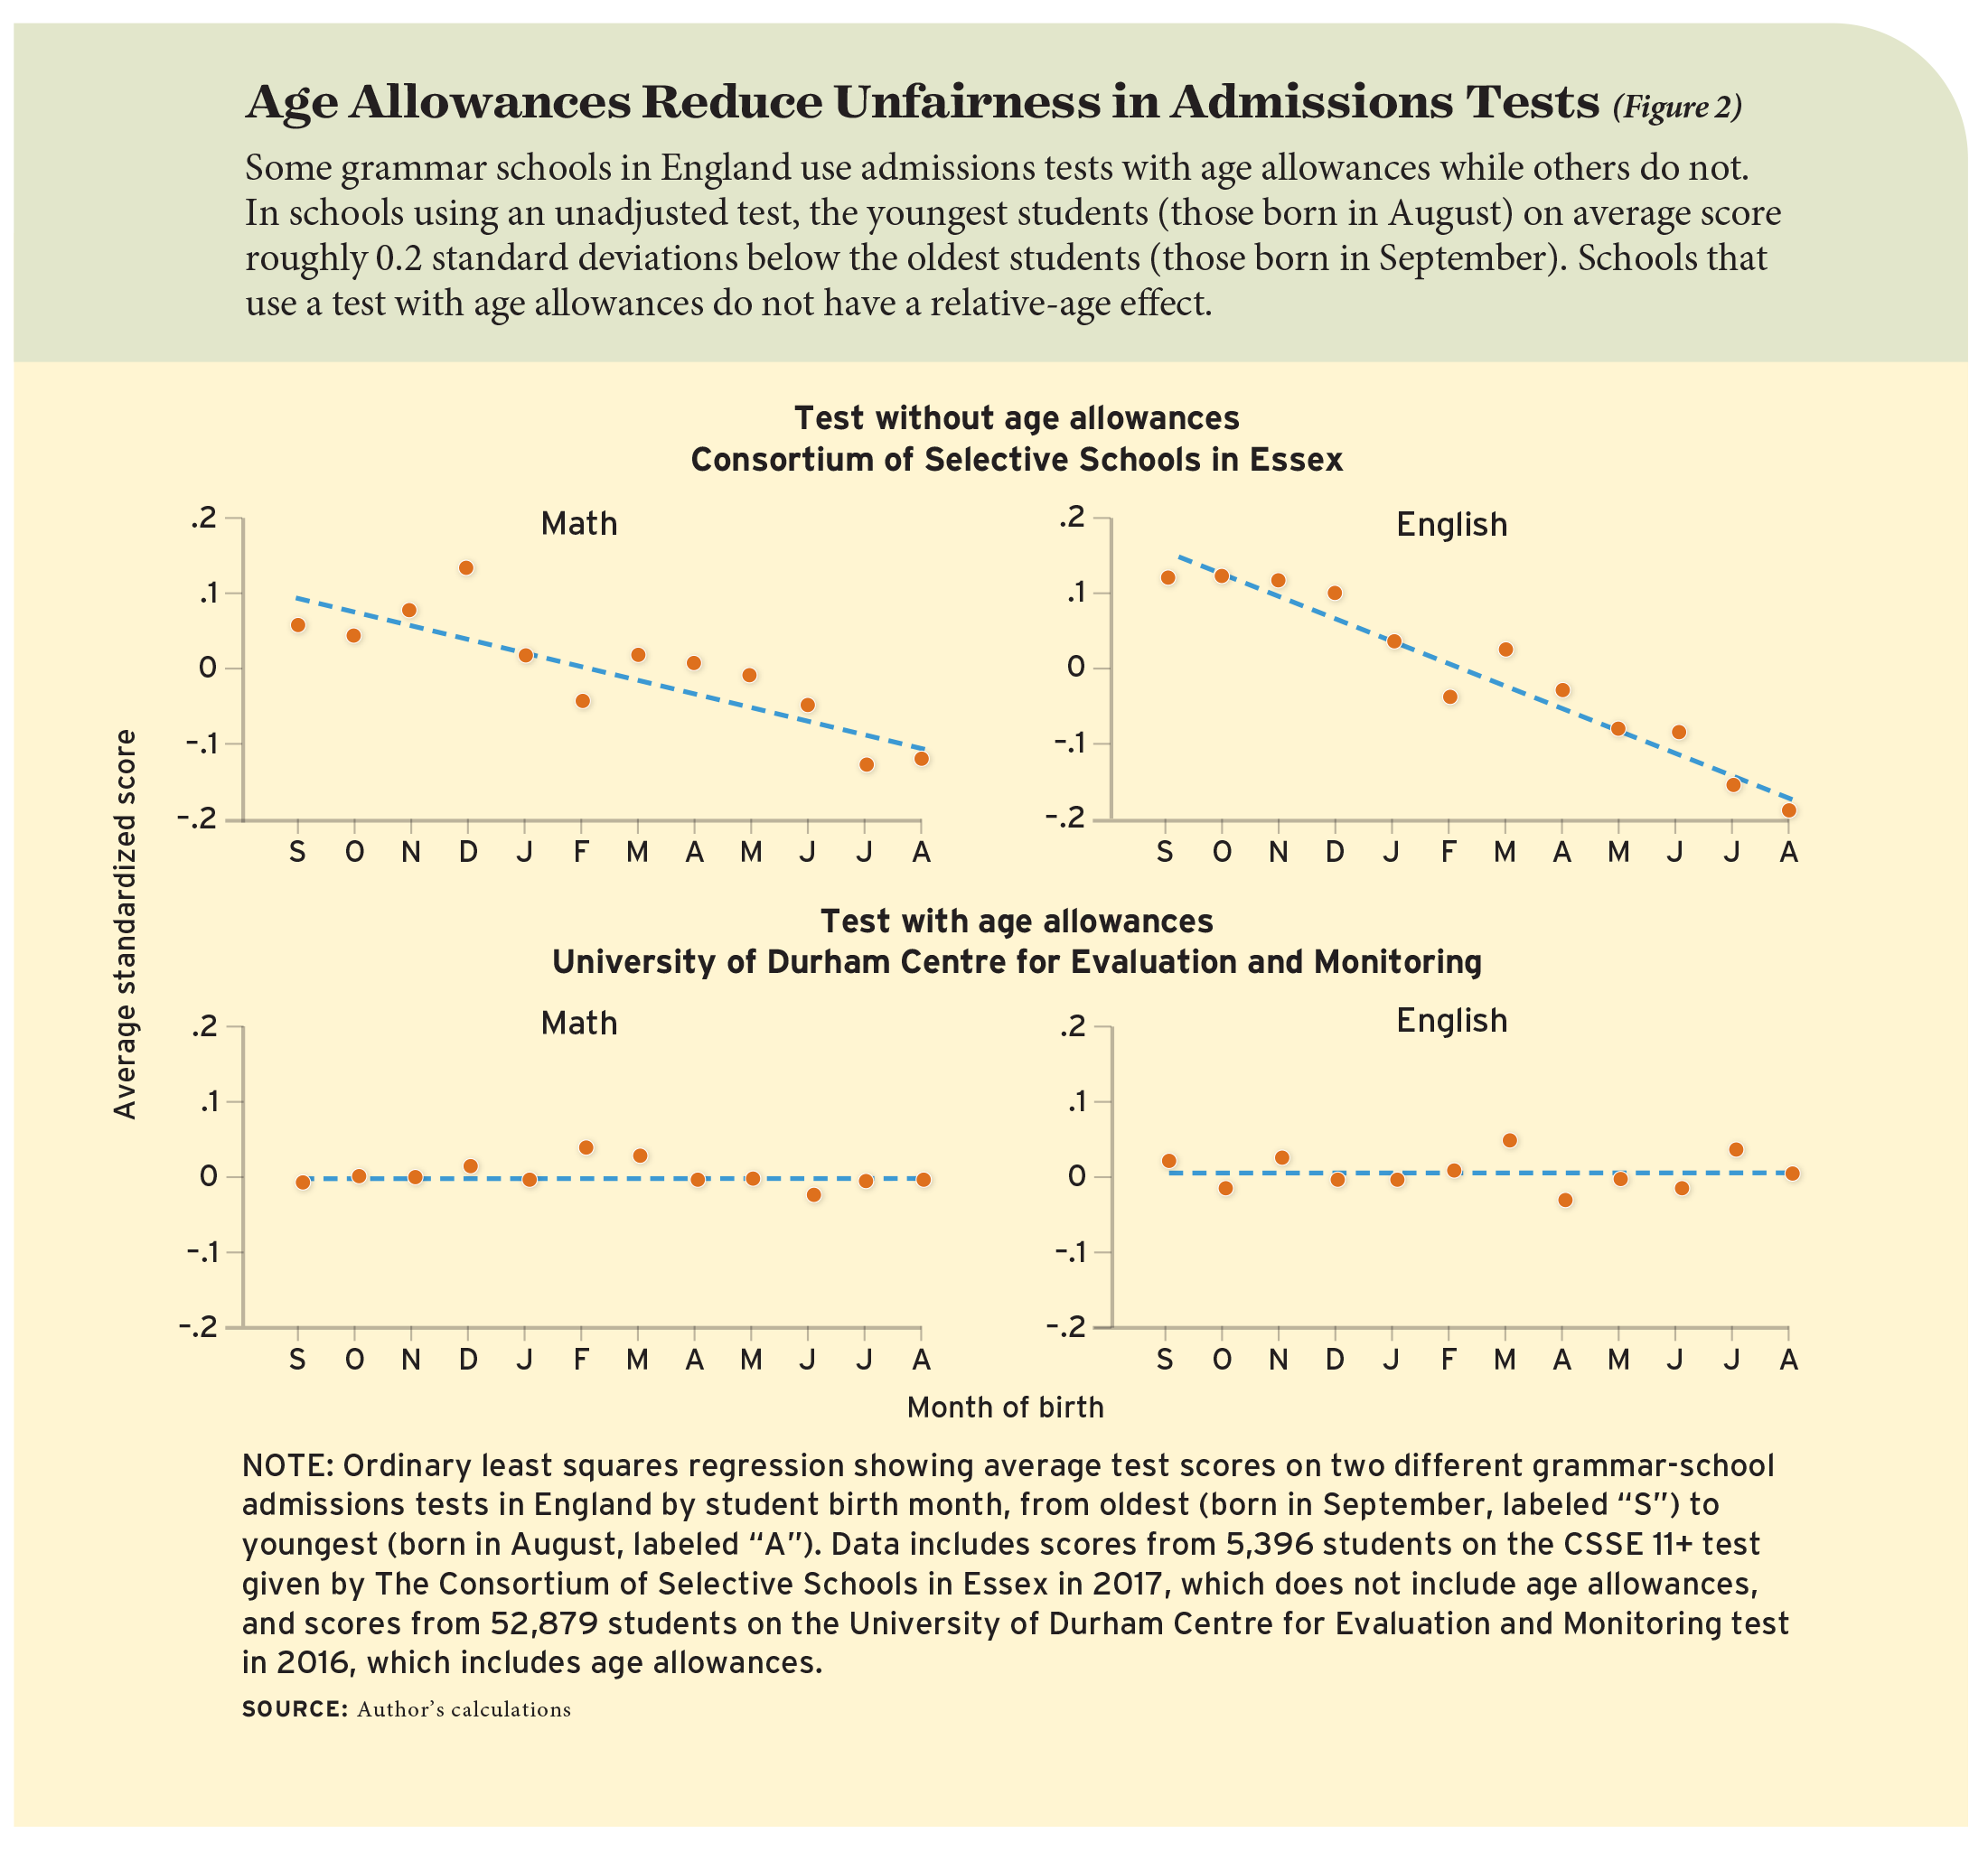 Age Allowances Reduce Unfairness in Admissions Tests (Figure 2)